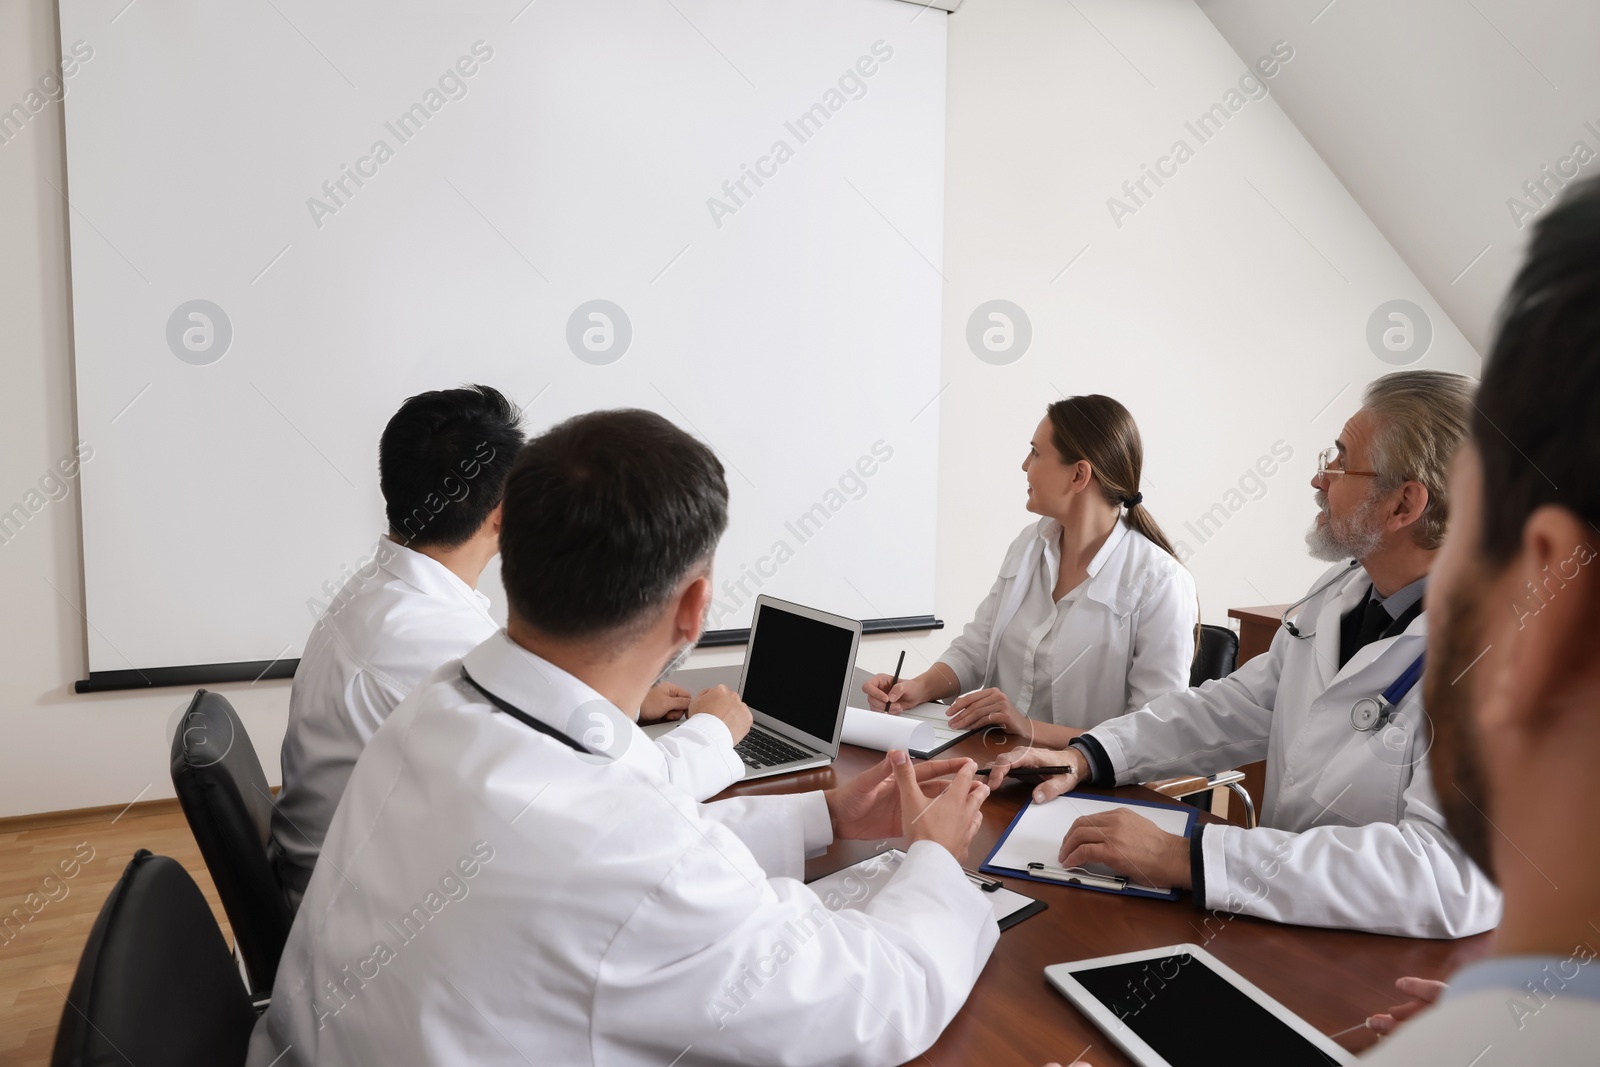 Photo of Team of doctors using video projector during conference indoors